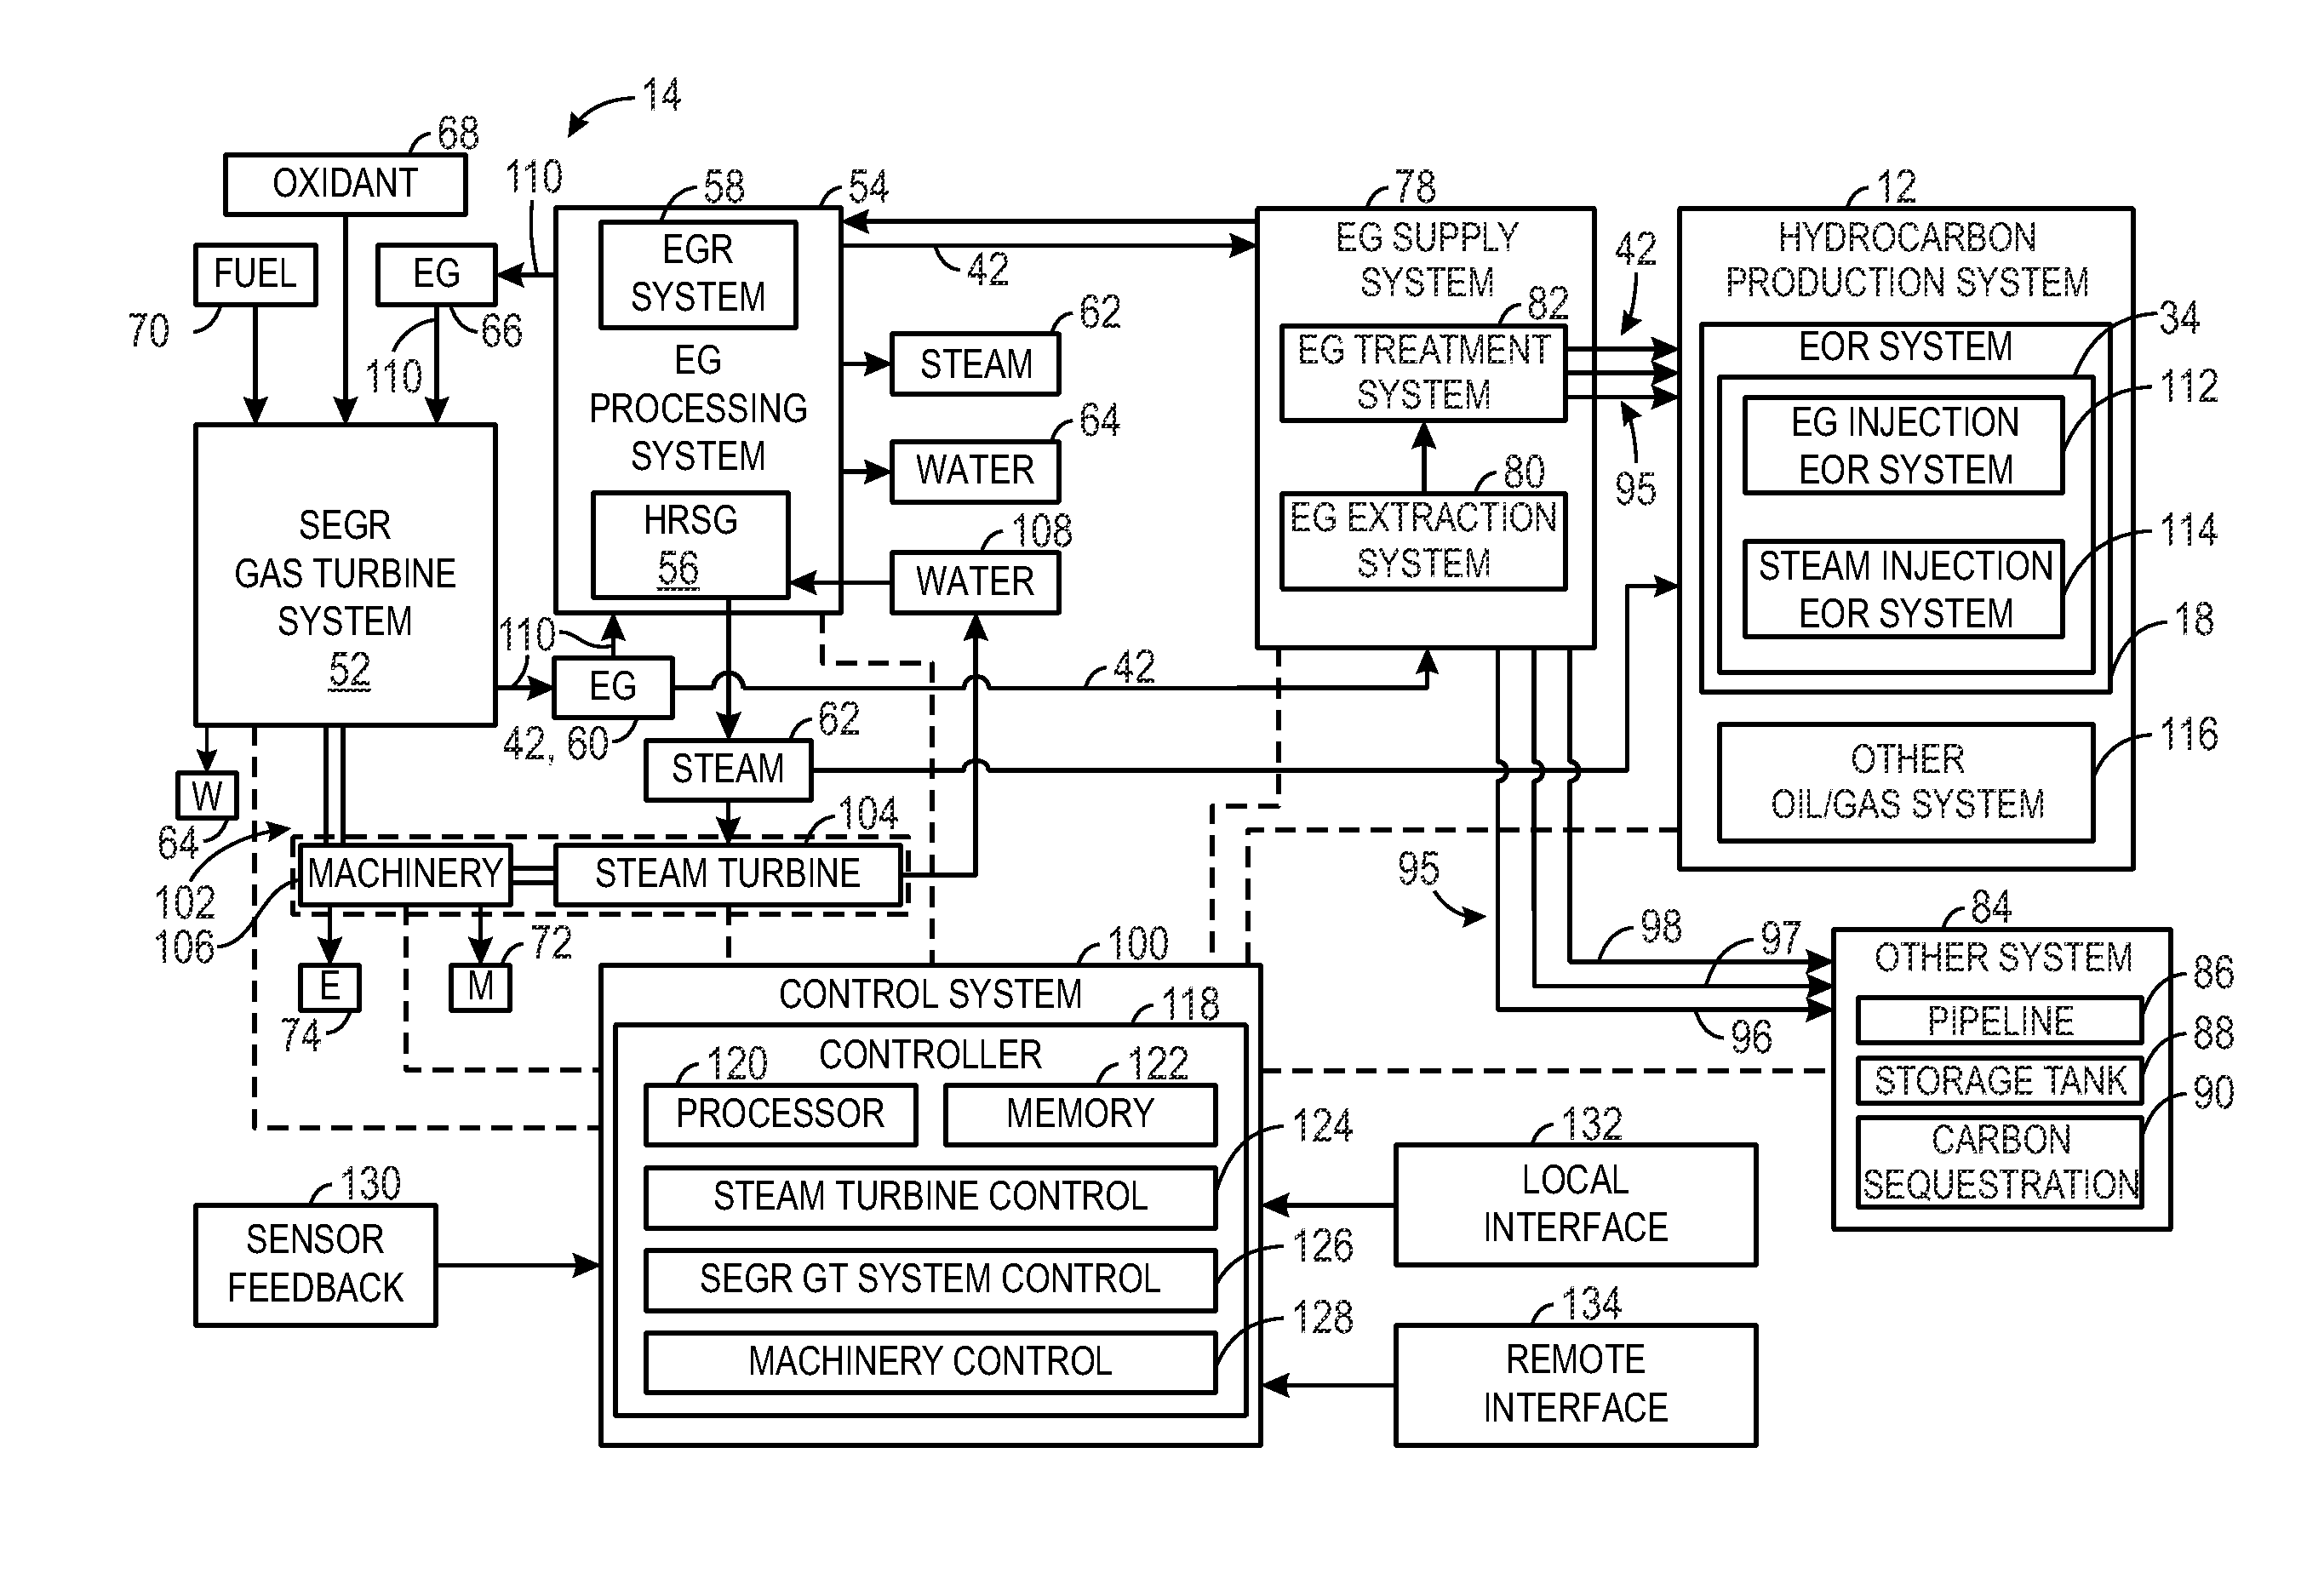 Stoichiometric combustion control for gas turbine system with exhaust gas recirculation